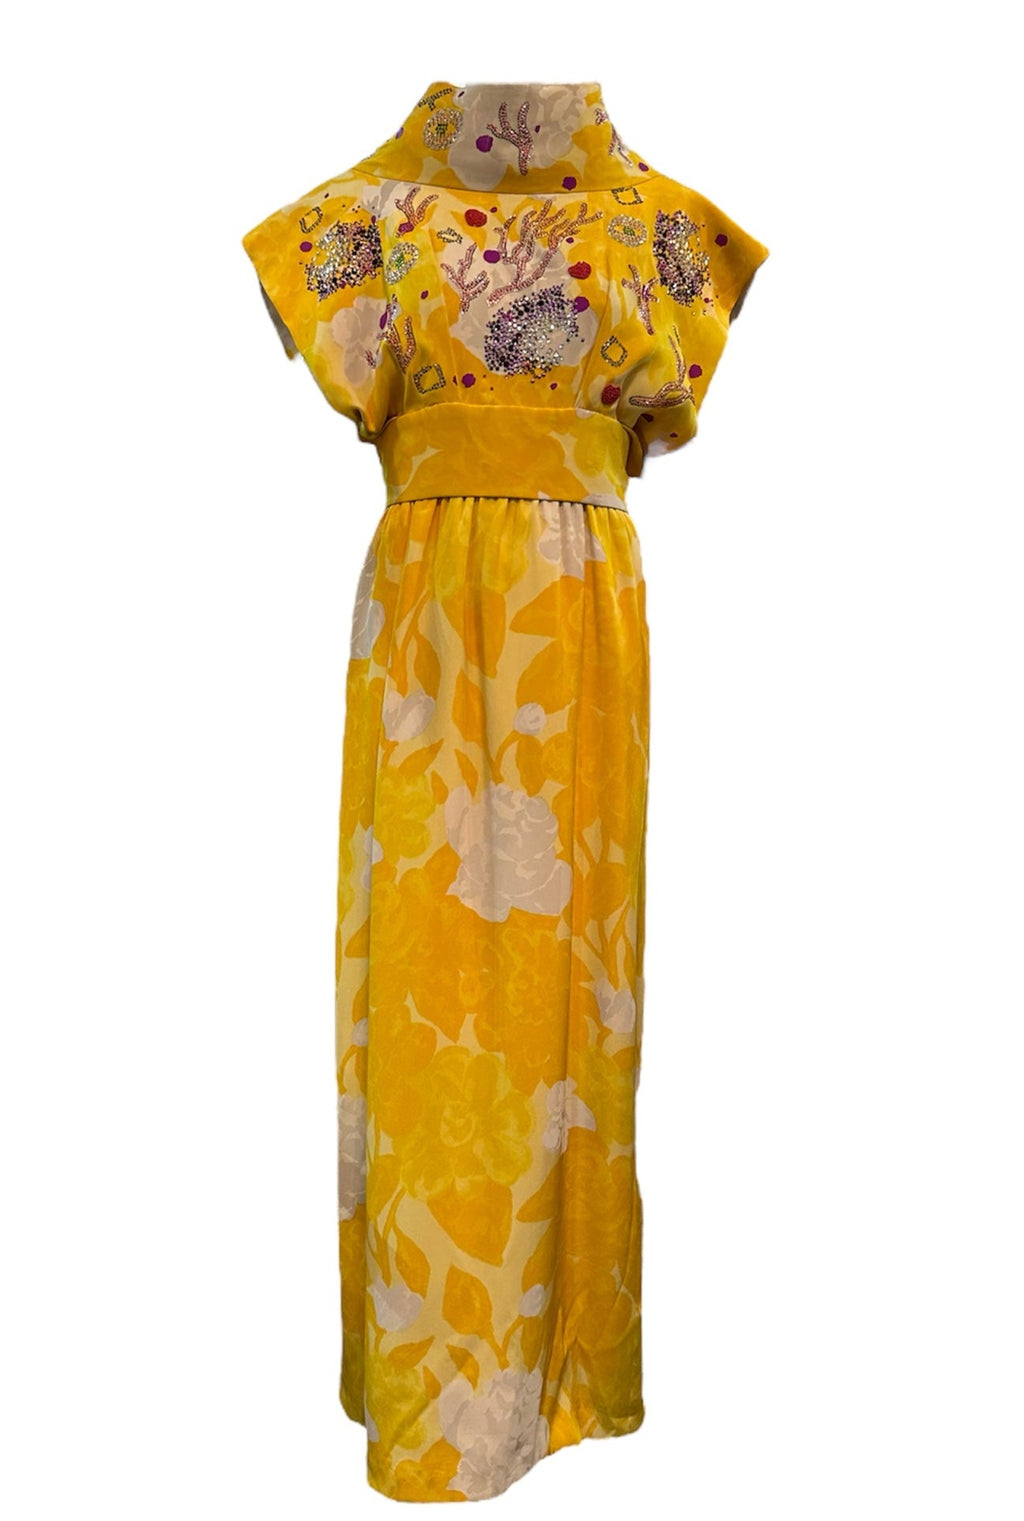 Libertine/Norman Norell Contemporary/1960s Yellow Floral Jacquard Super Embellished Gown FRONT 1 of 10